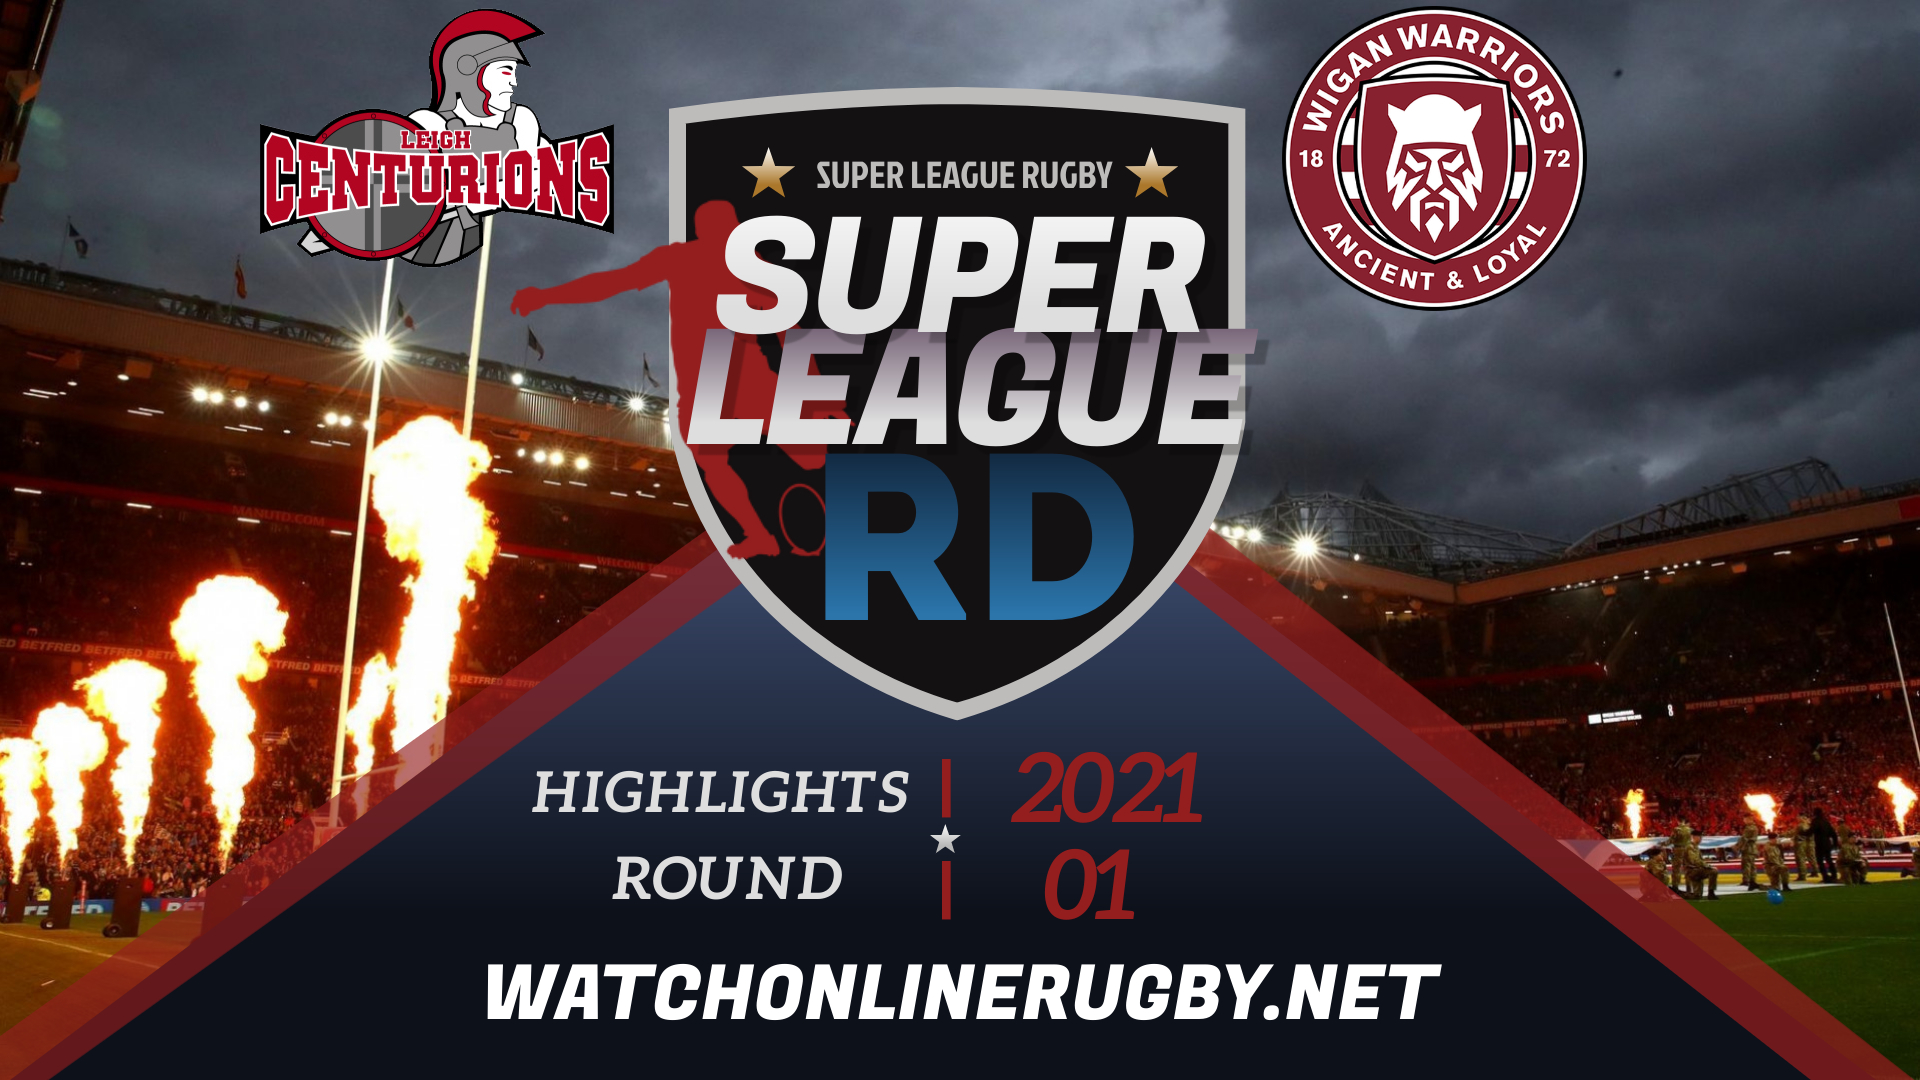 Leigh Centurions Vs Wigan Warriors Super League Rugby 2021 RD 1